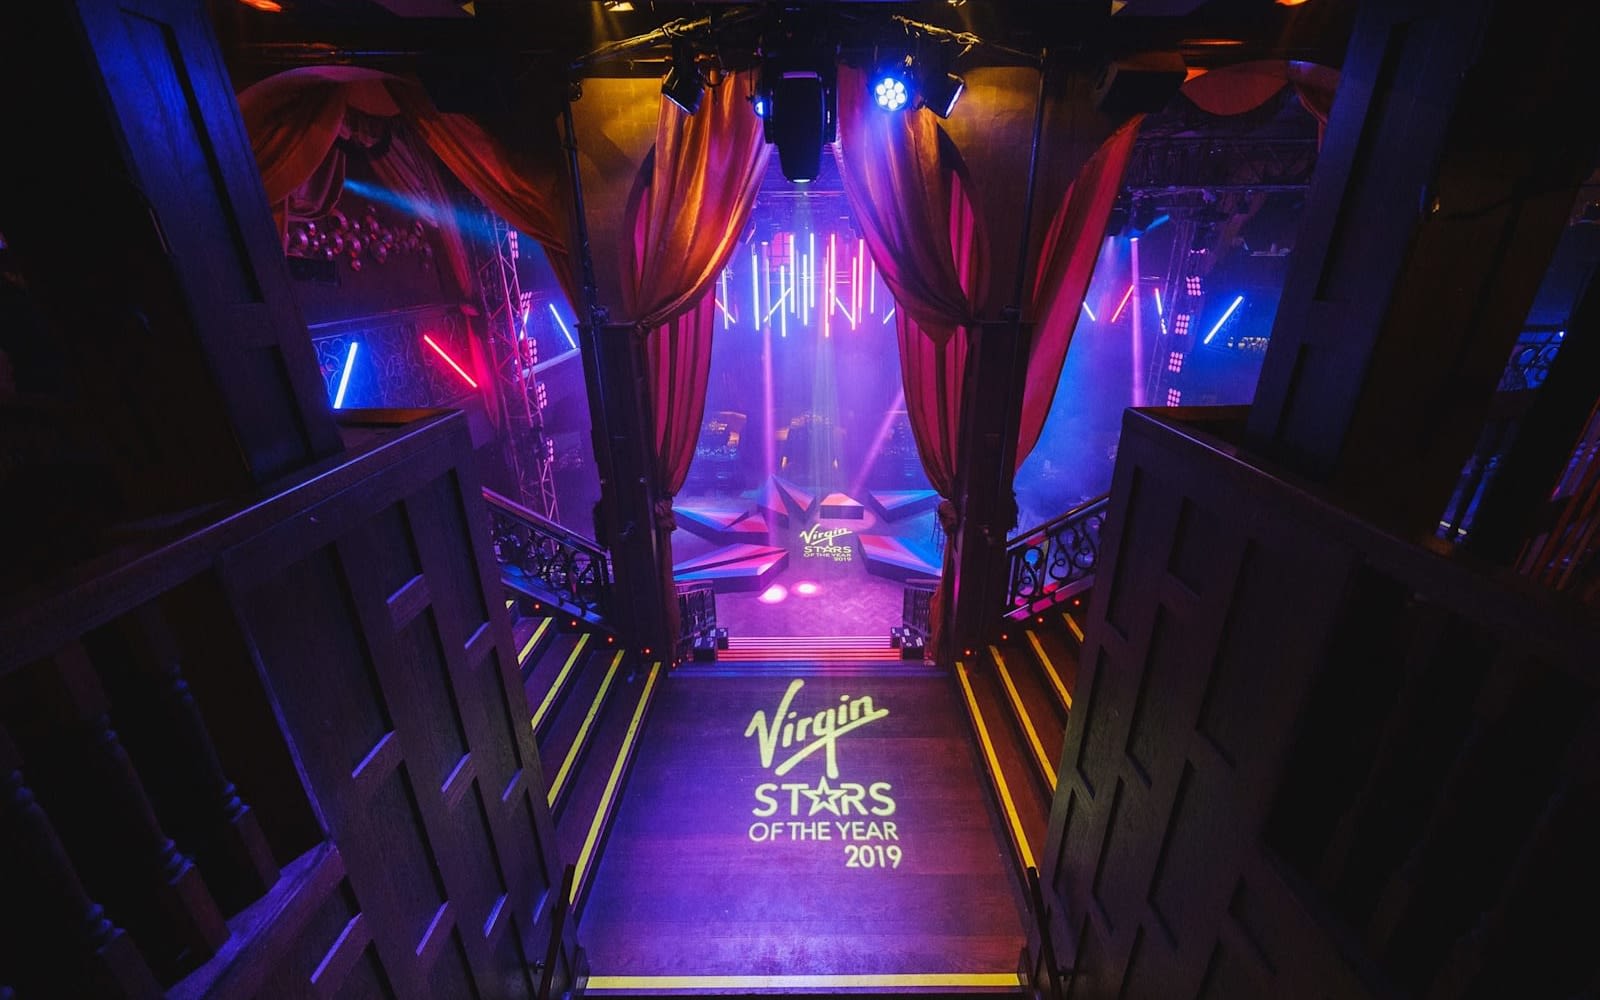 Bright lights shine on a dance floor, highlighting the words Virgin Stars of the Year 2019